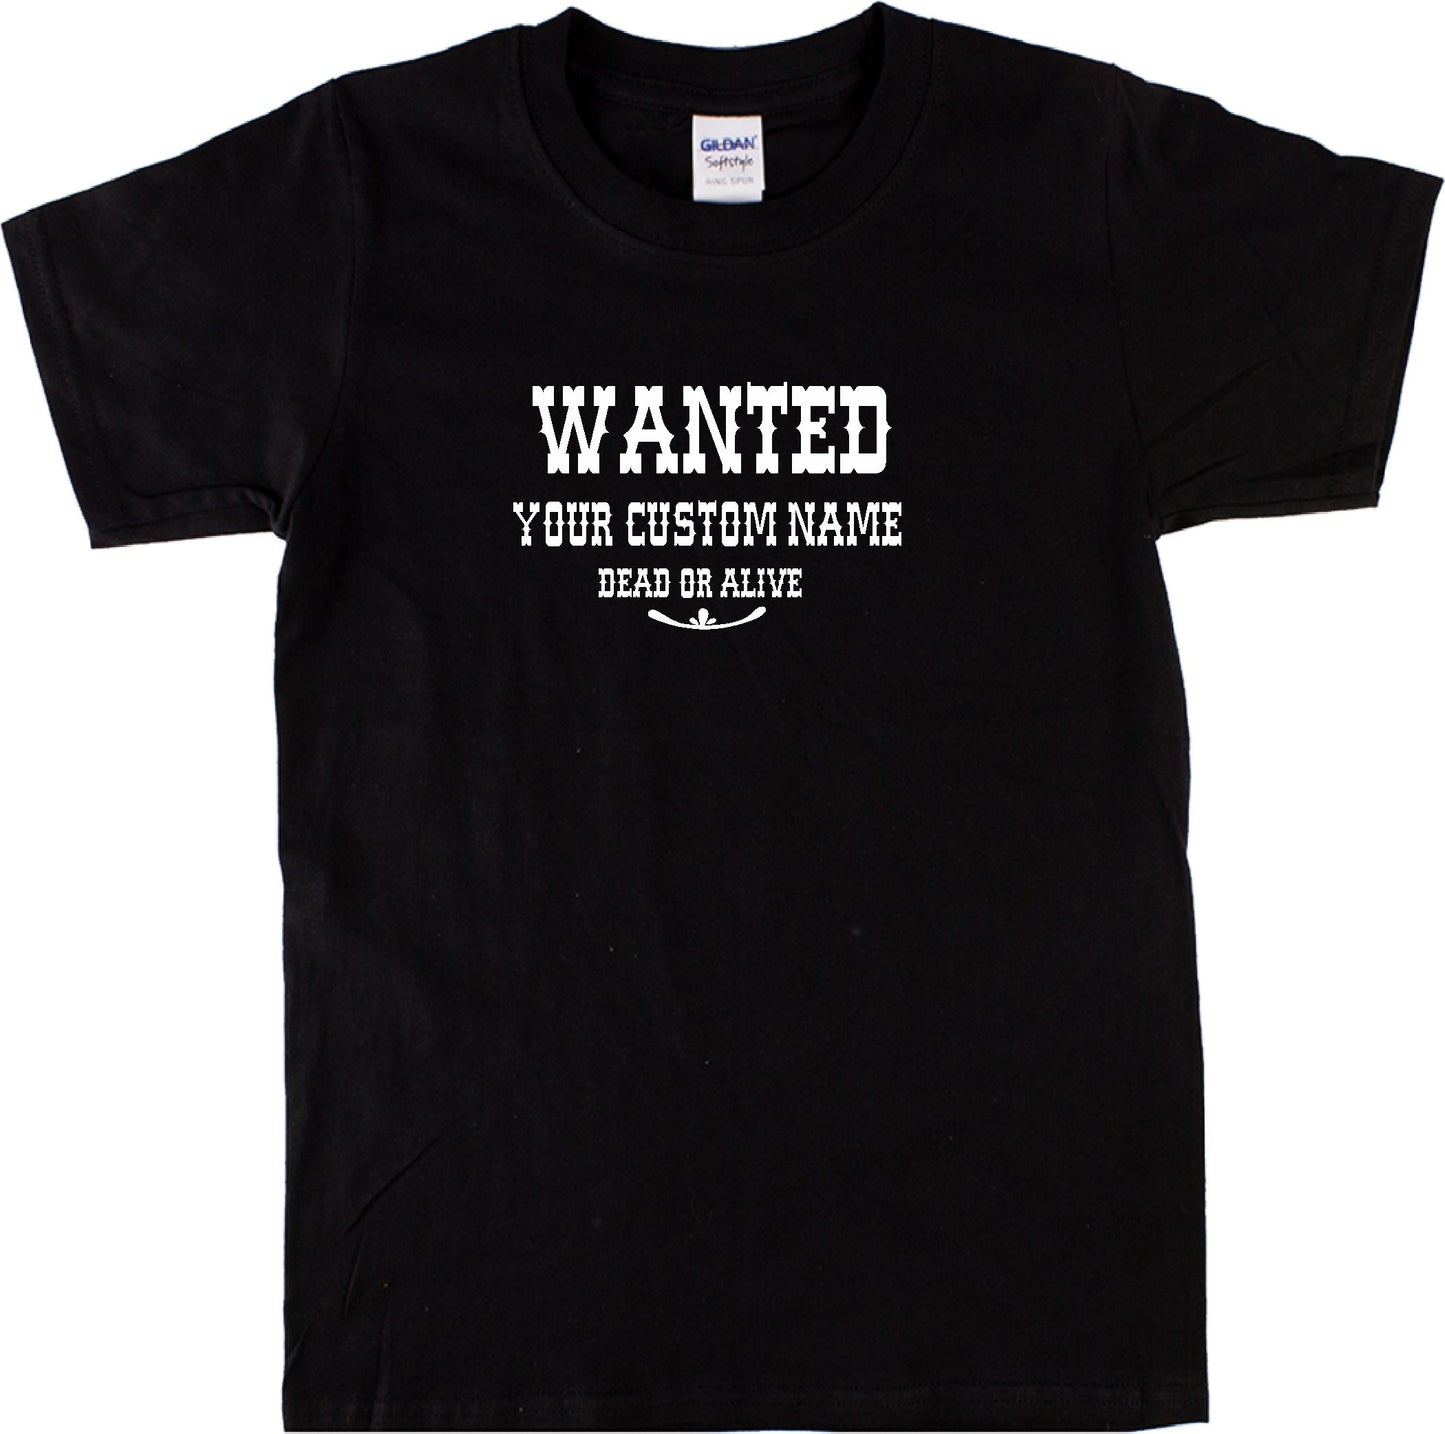 Personalised Custom Printed 'Wanted Poster' T-Shirt - Cowboy, Western, S-XXL